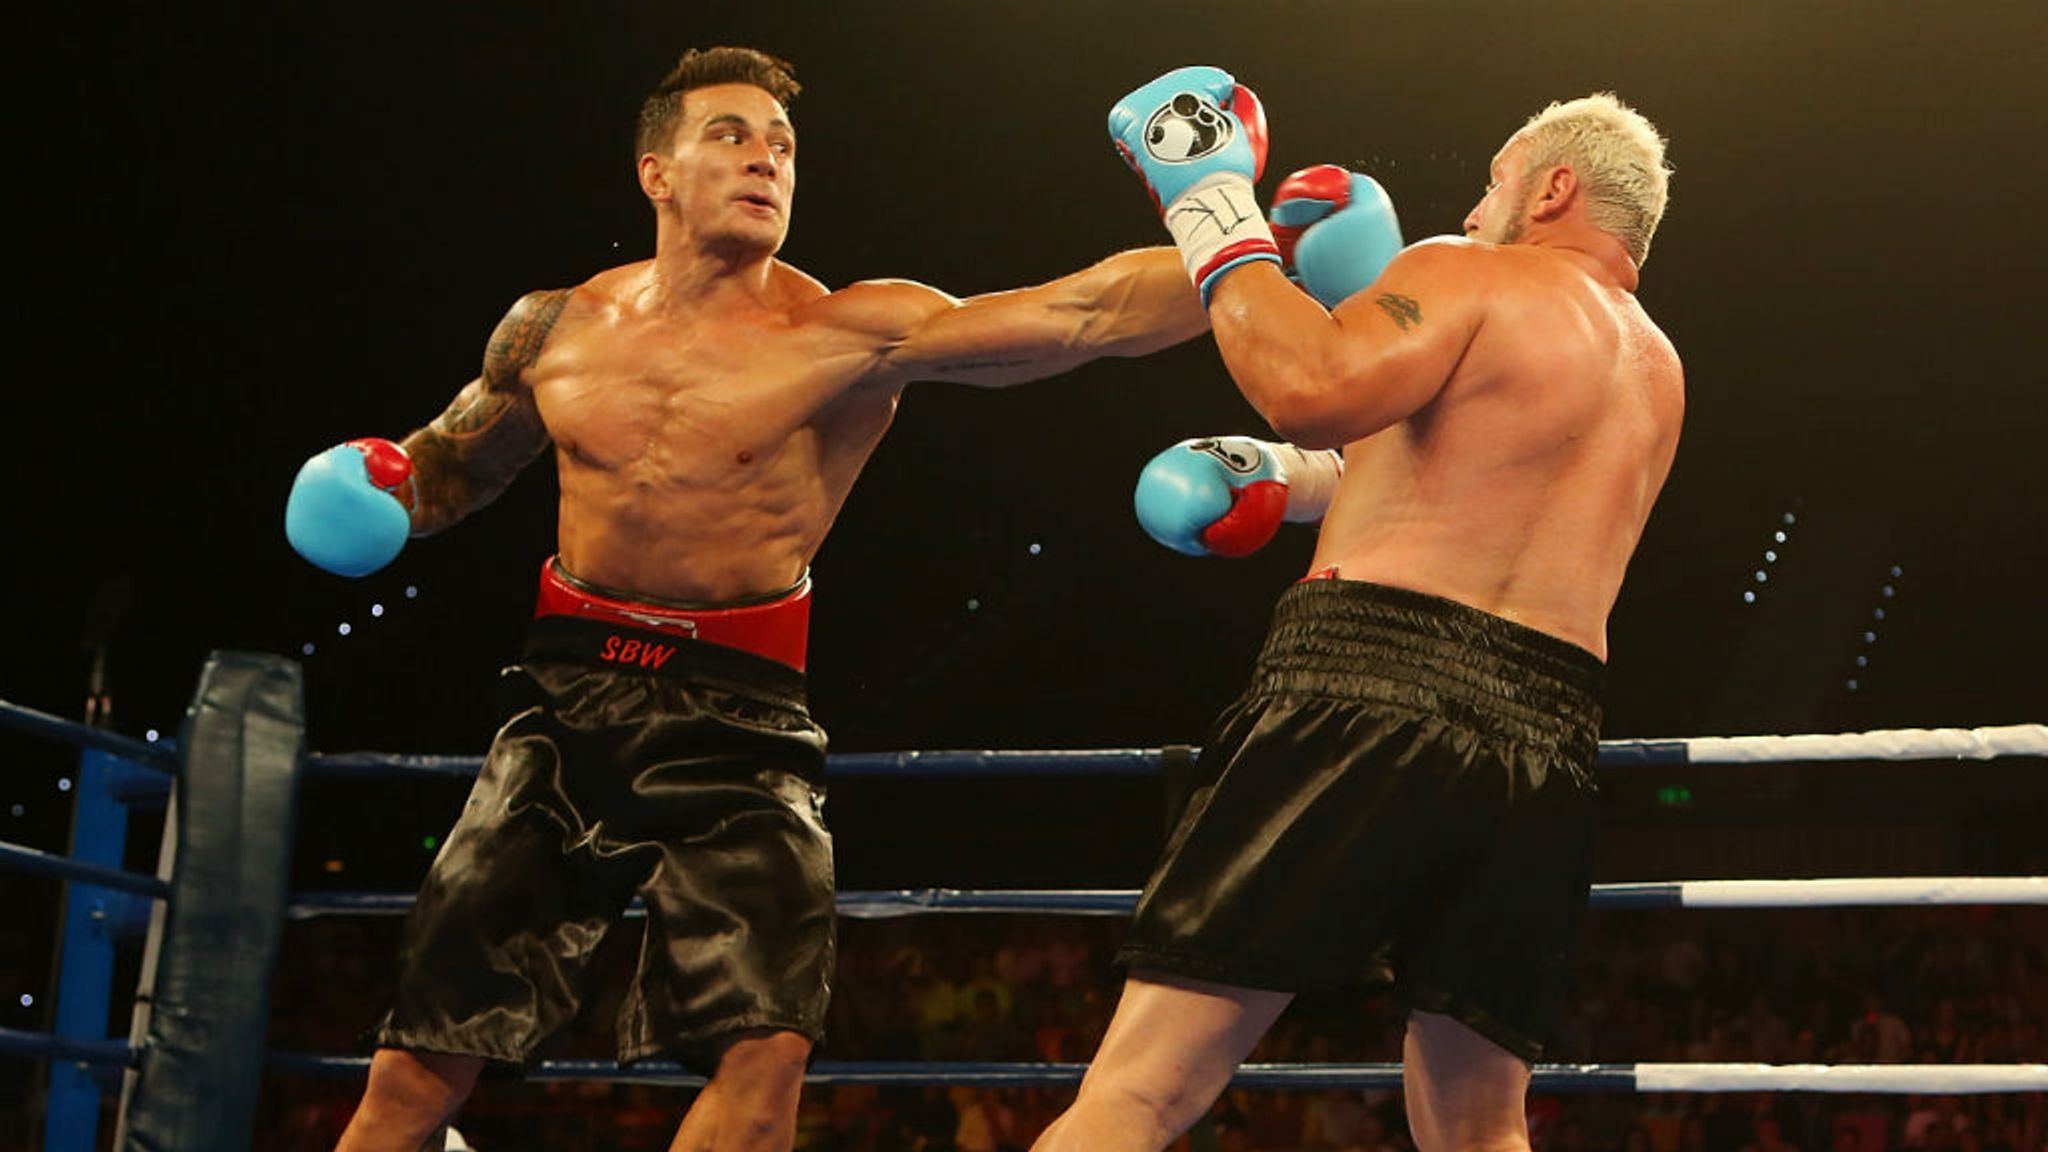 Rugby players Sonny Bill Williams and Quade Cooper both win in the boxing ring Boxing News Sky Sports